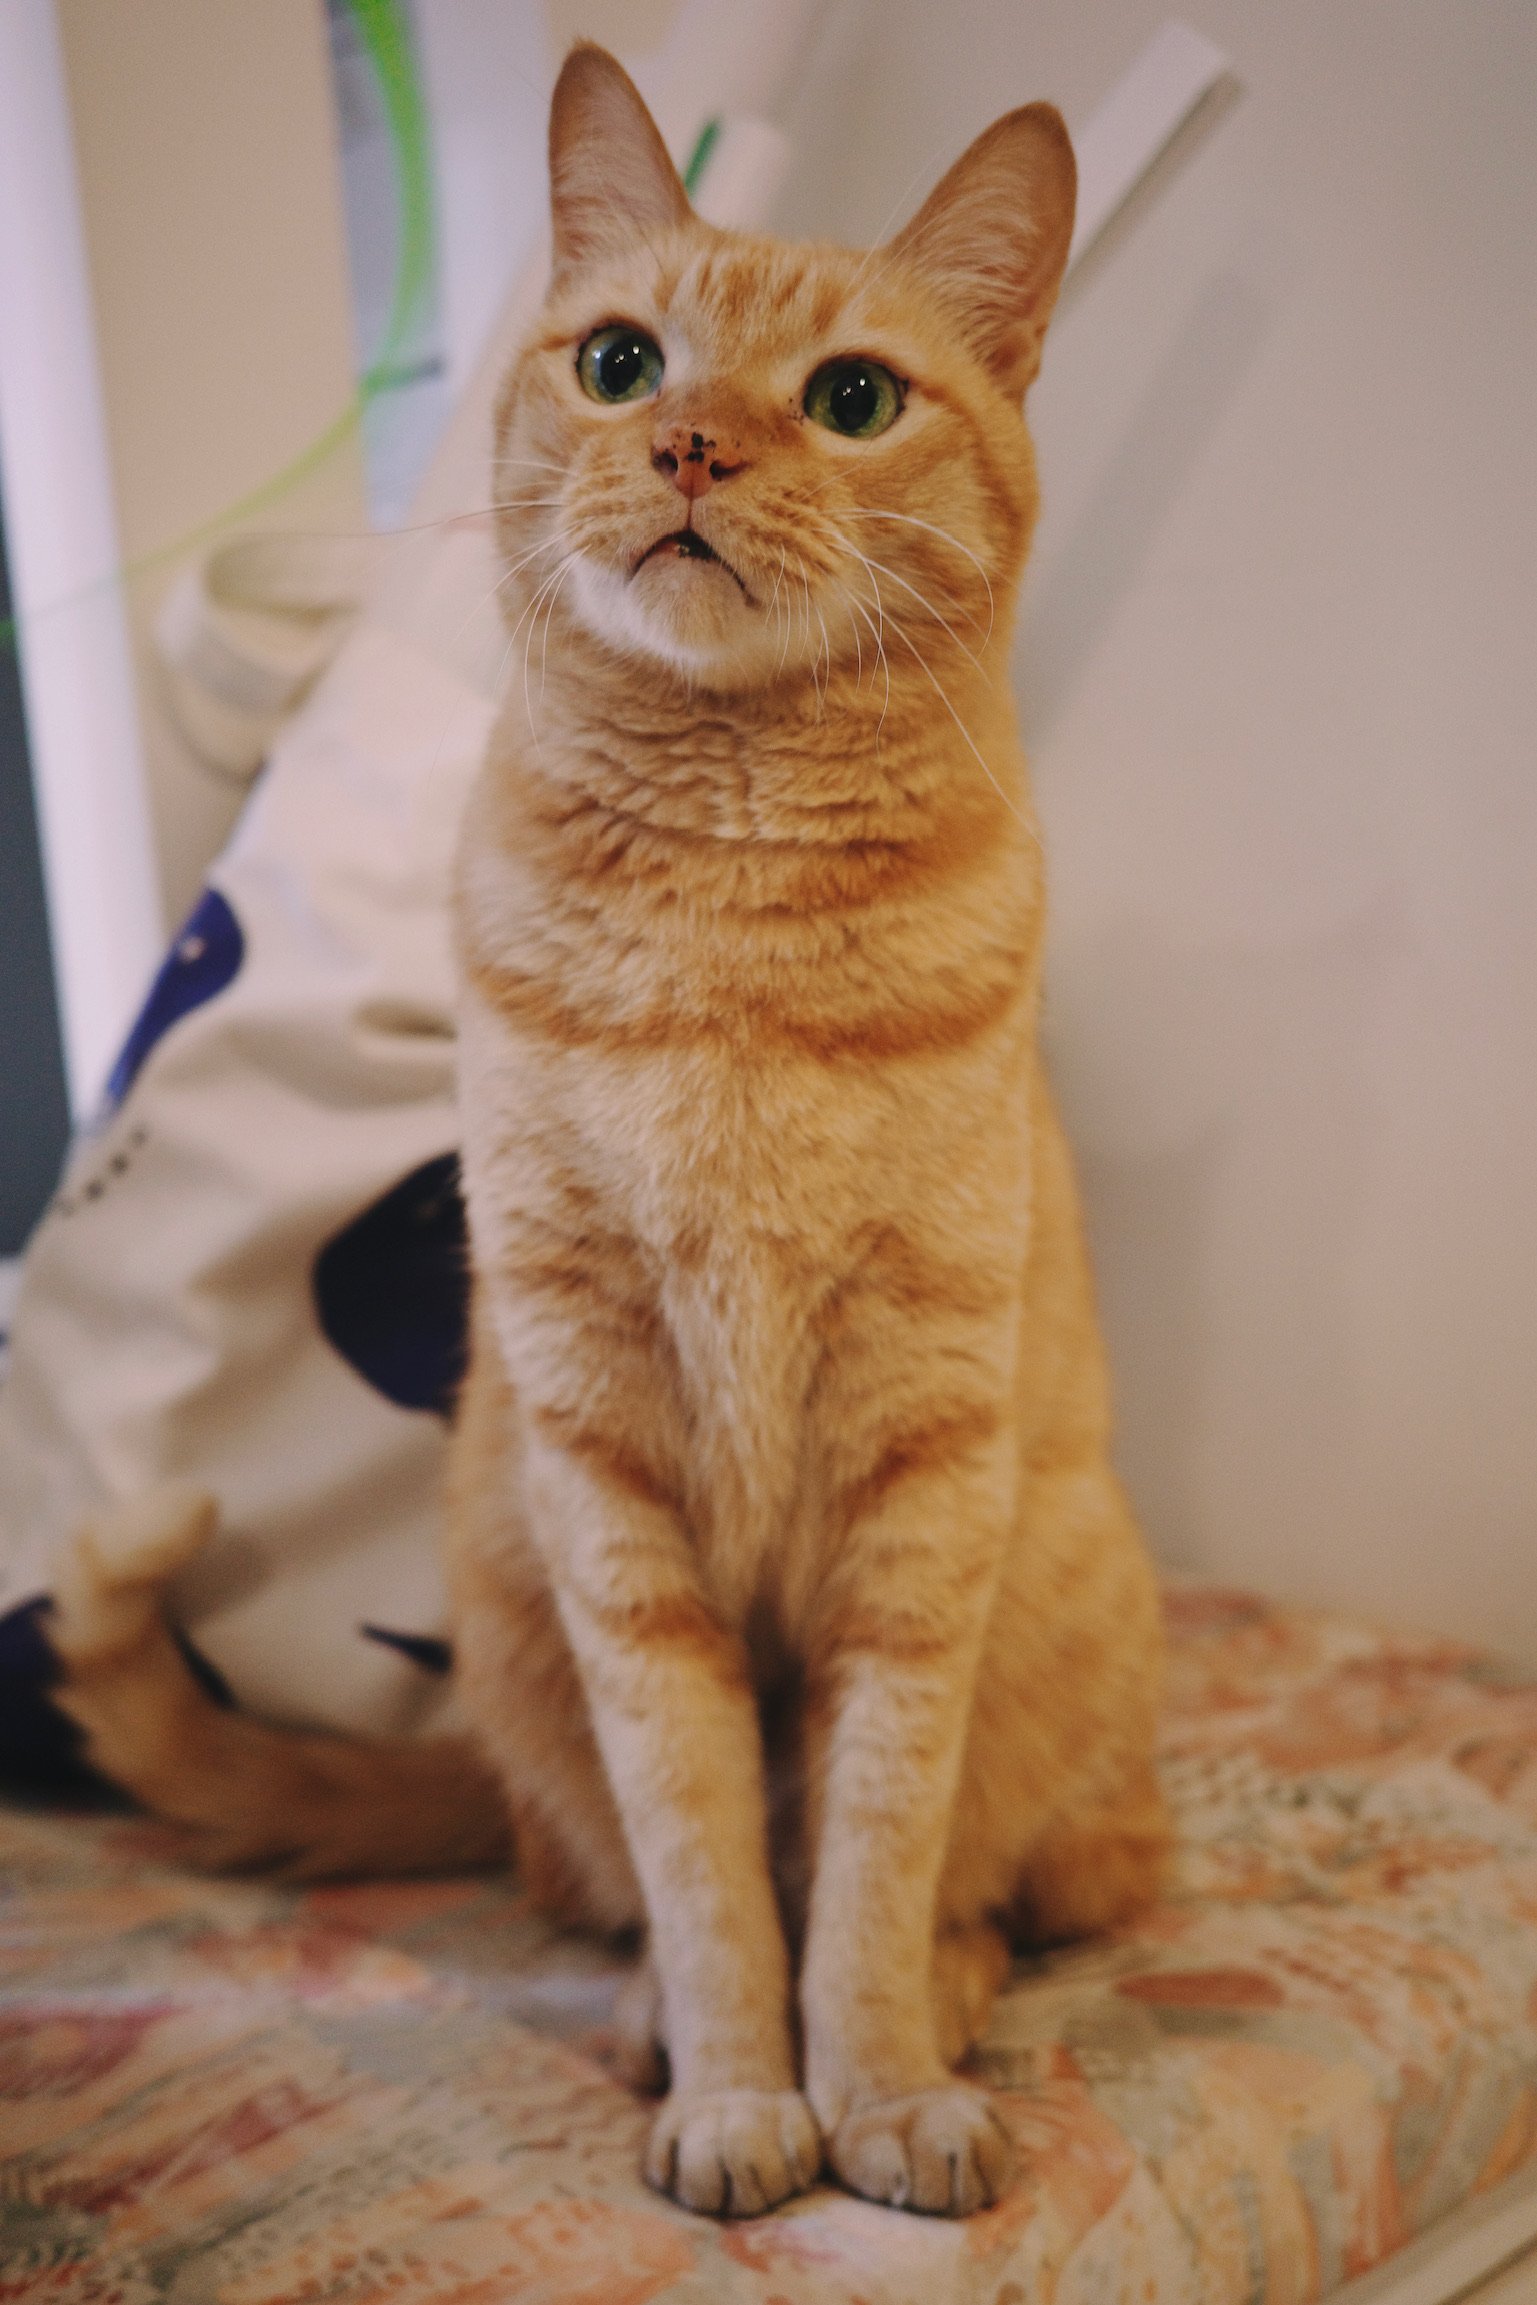 A very cute ginger cat sitting up focusing on a cat toy.